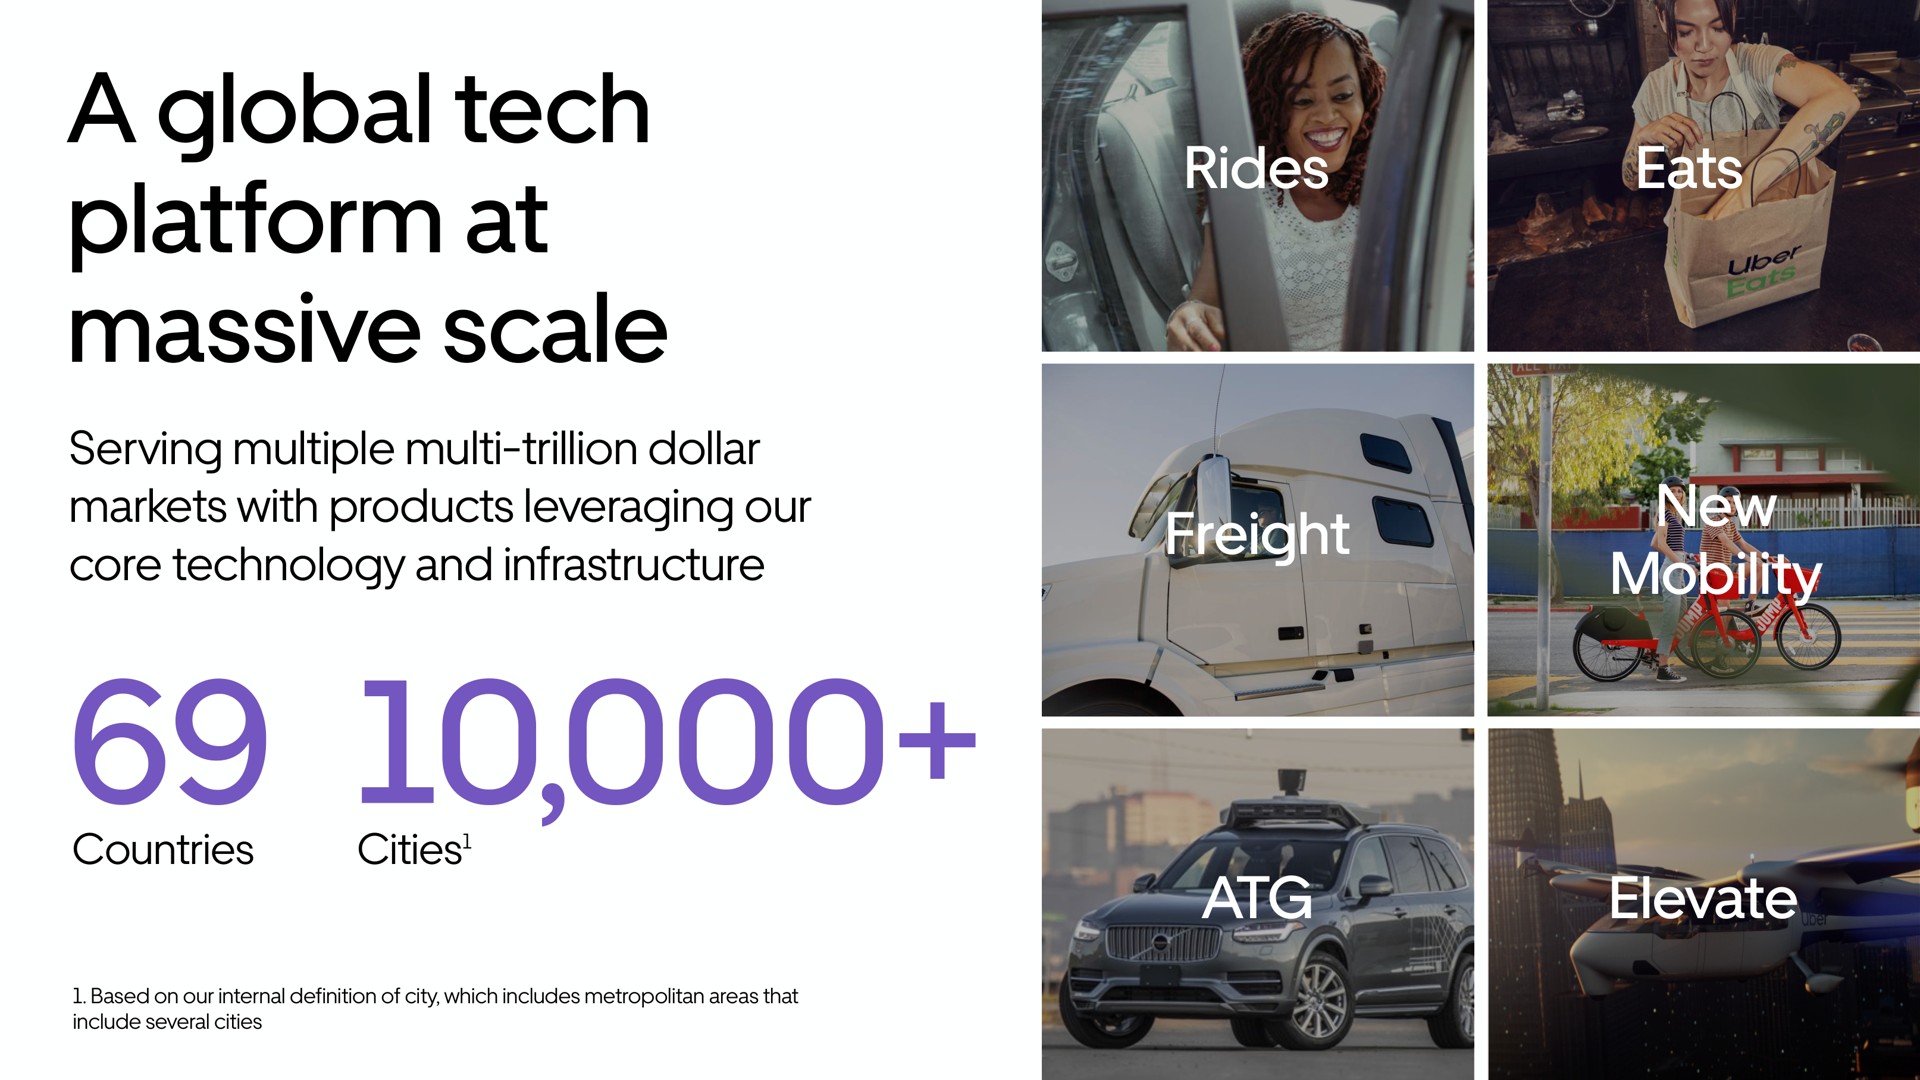 a global tech platform at massive scale rides eats freight new mobility elevate | Uber